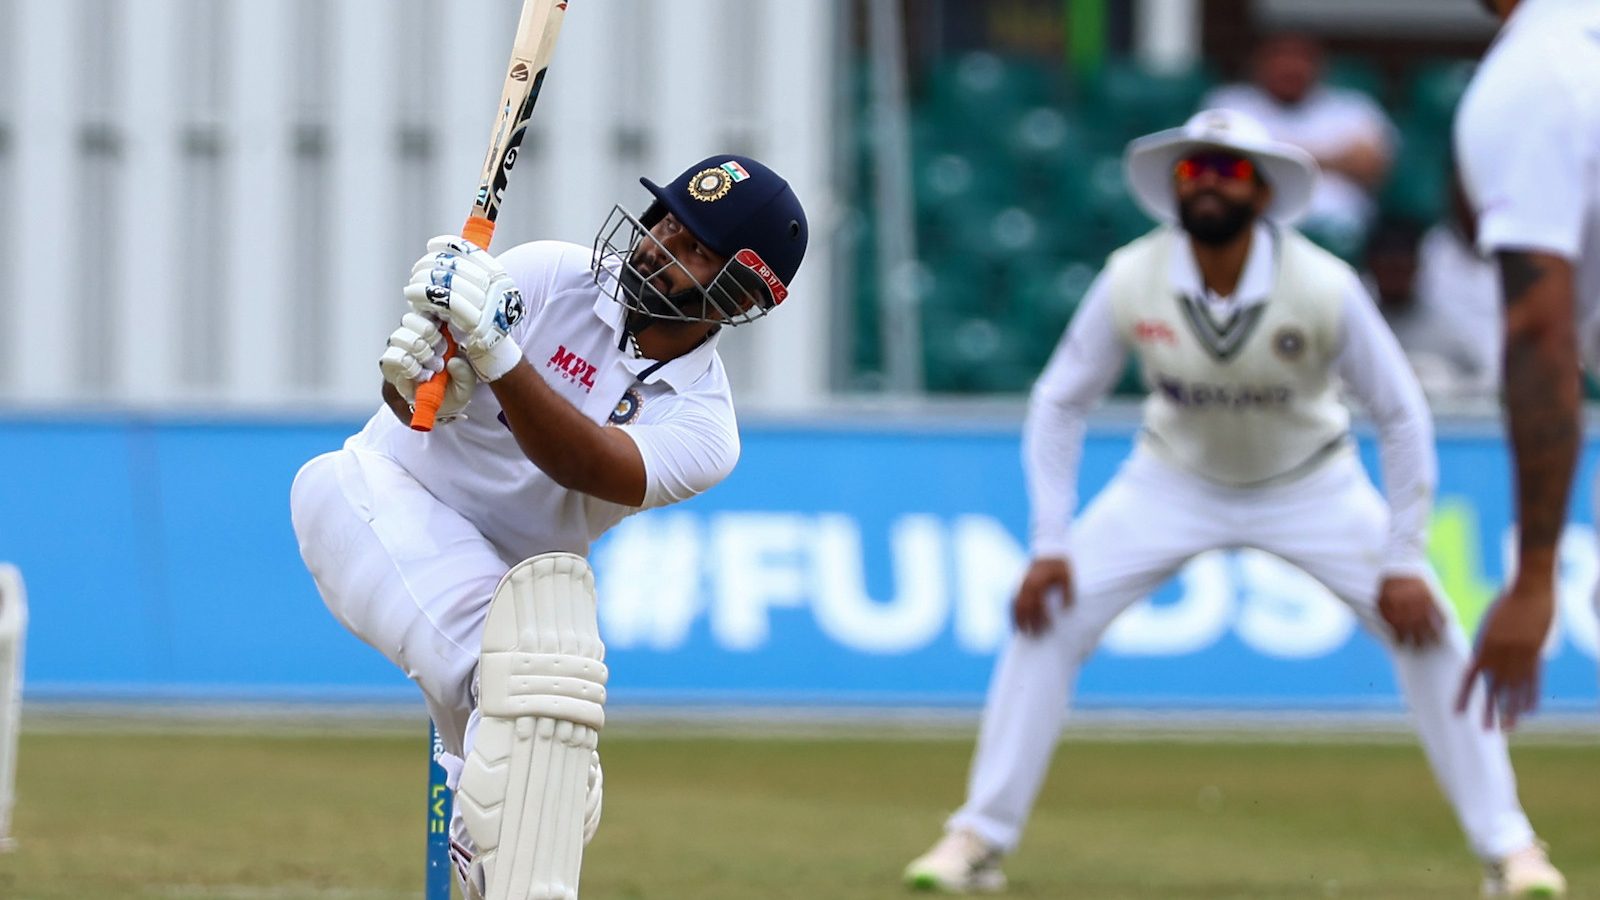 lei-vs-ind-rishabh-pant-turns-foe-for-own-bowlers-but-india-take-crucial-lead